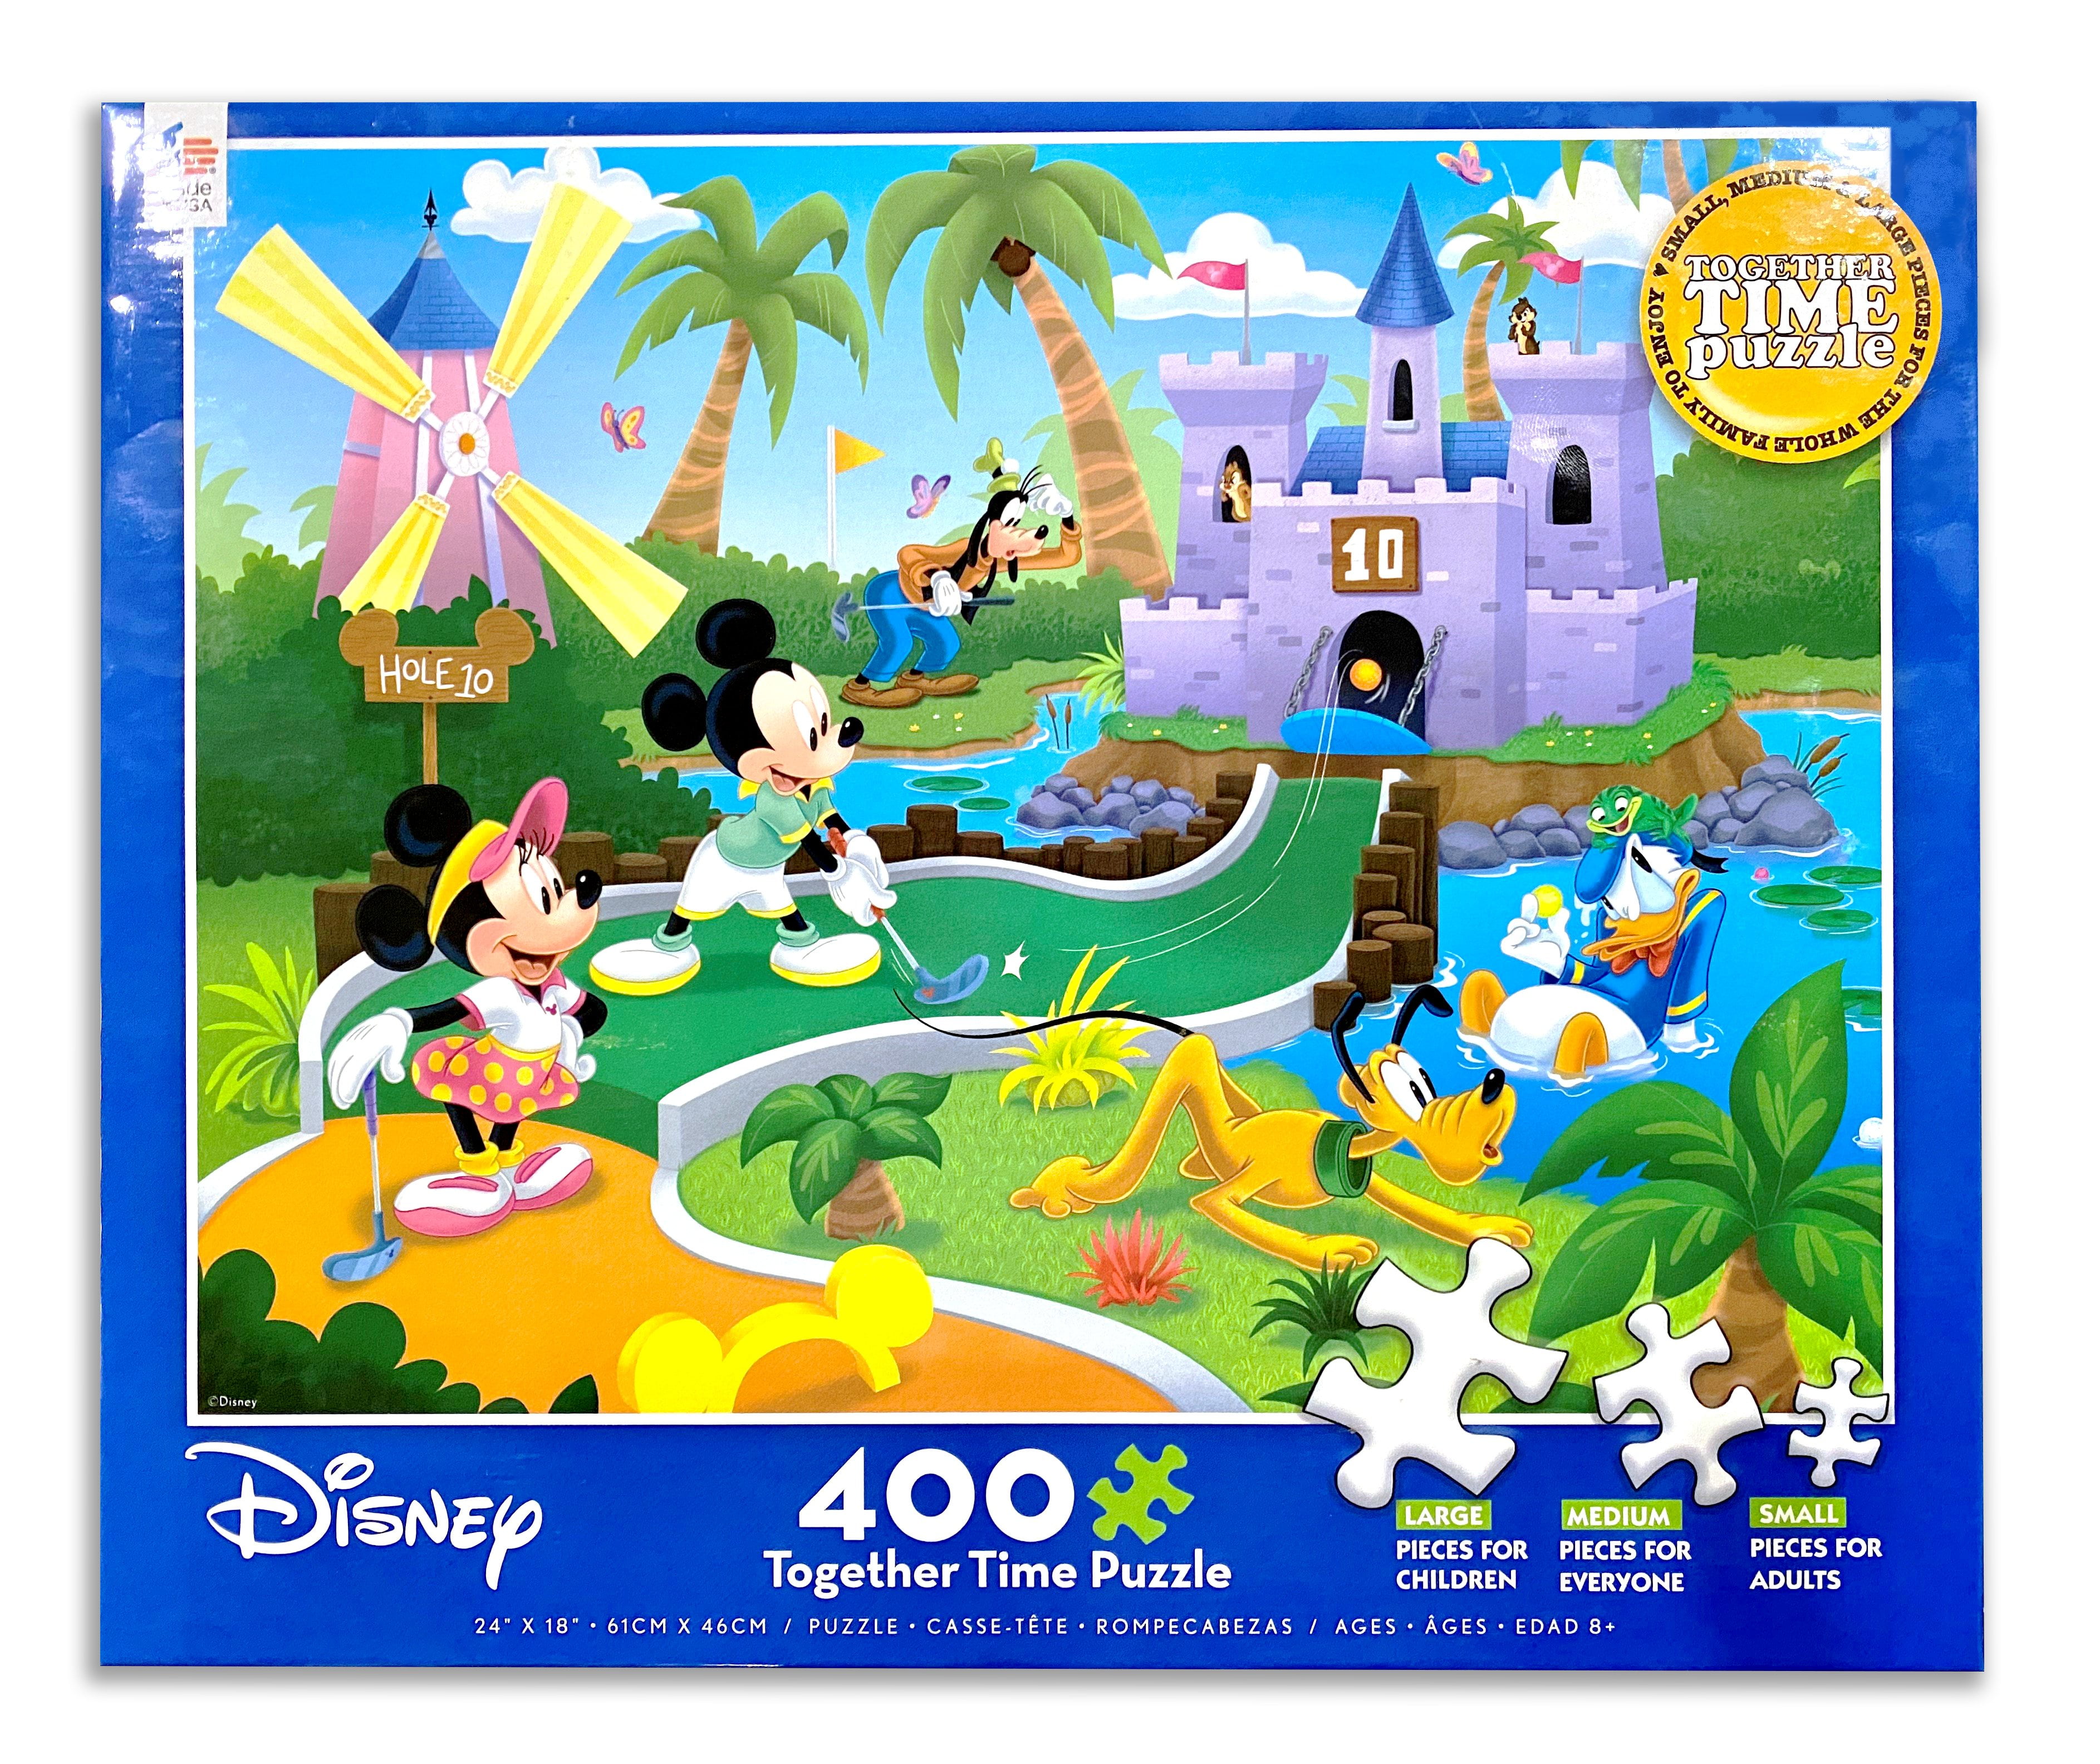 Disney Classic Mickey Mouse Cartoons Puzzle Jigsaw 504 Pcs Home Decoration Play 